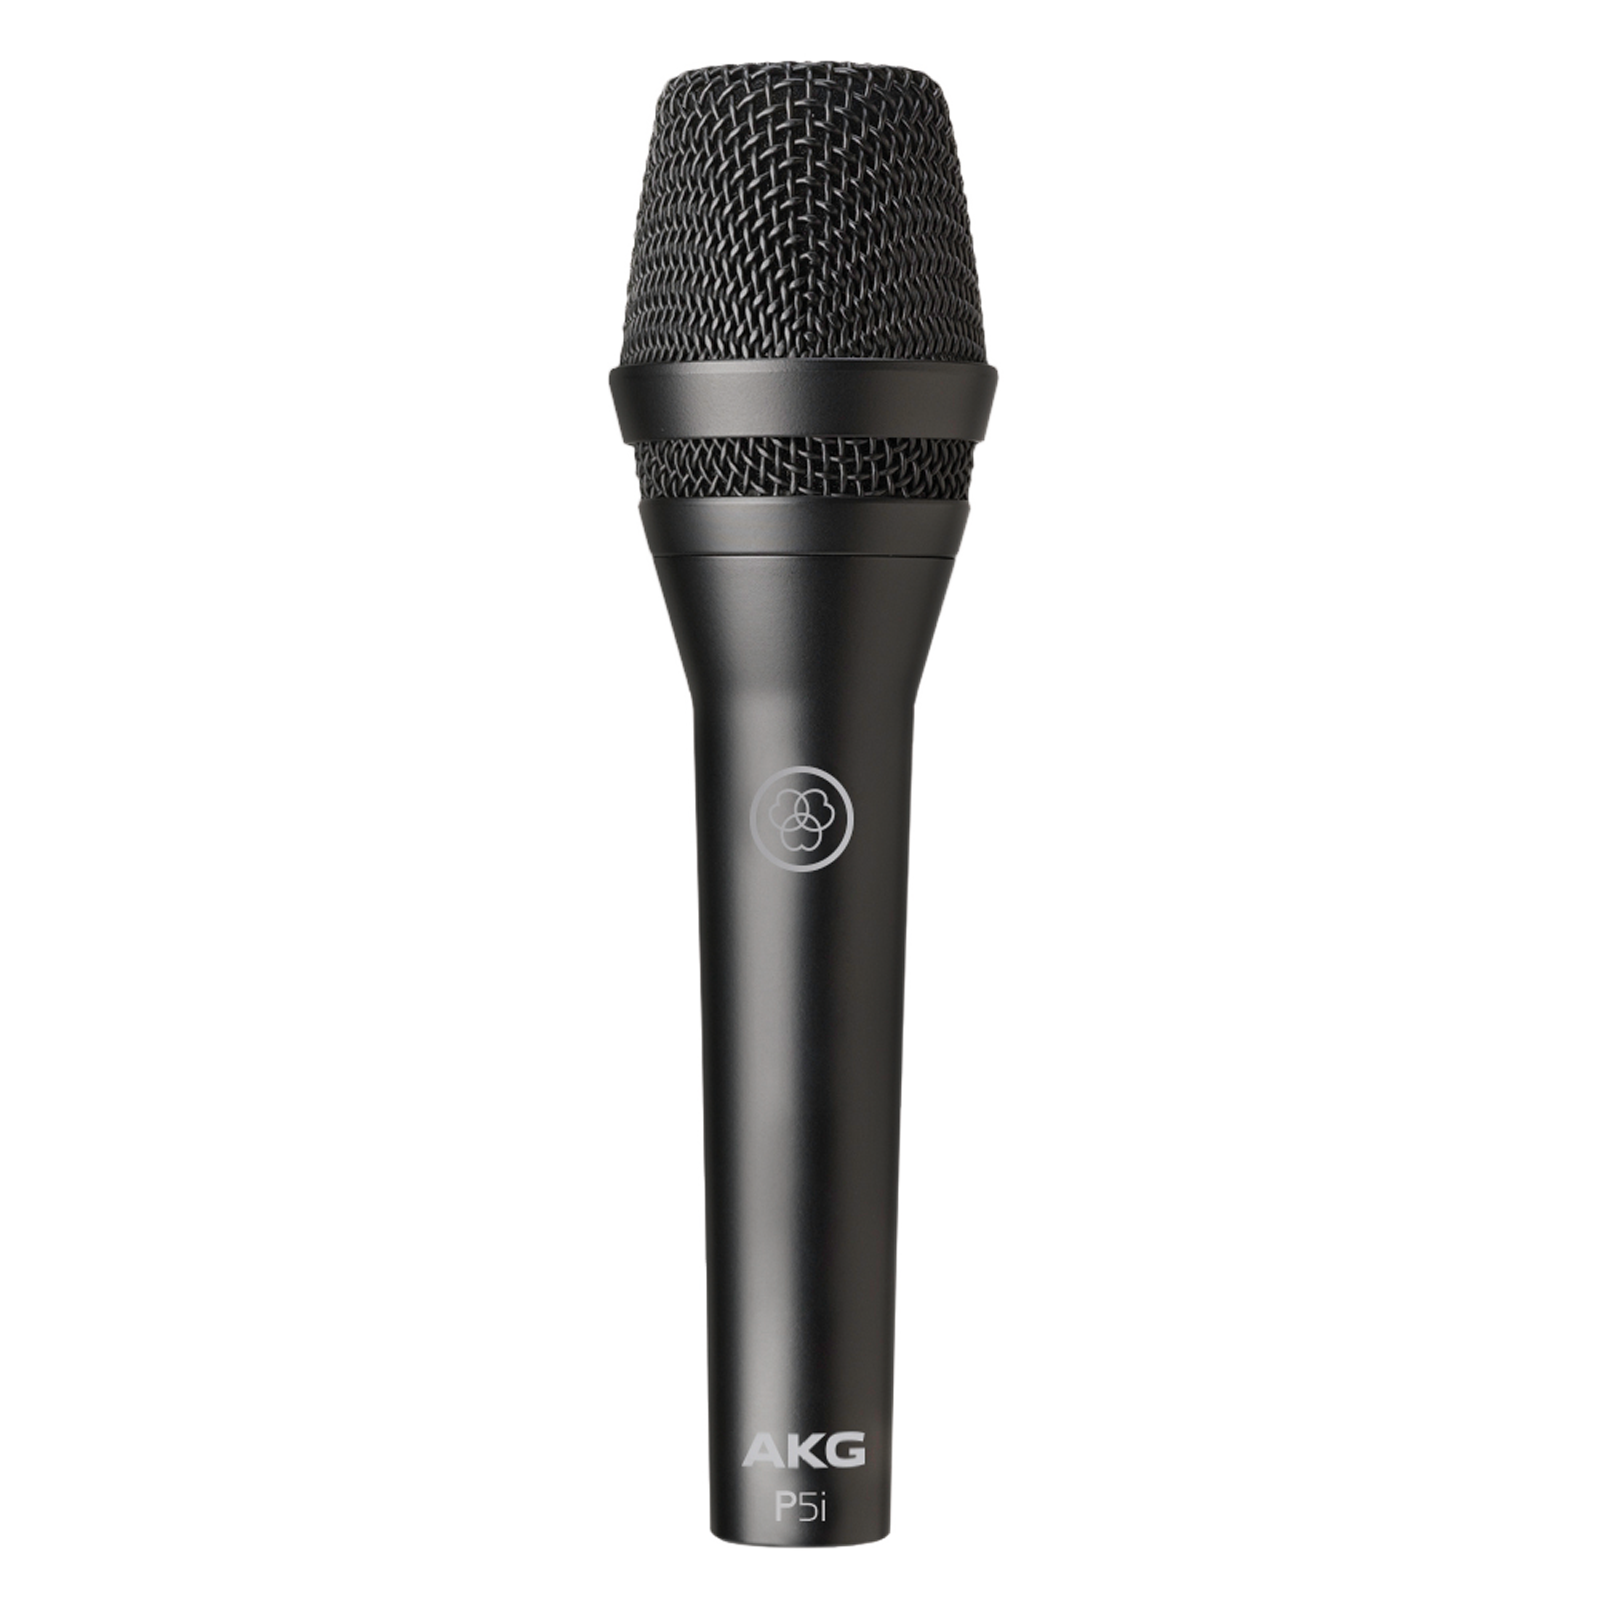 P5i - Black - Dynamic vocal microphone with HARMAN Connected PA compatibility - Hero